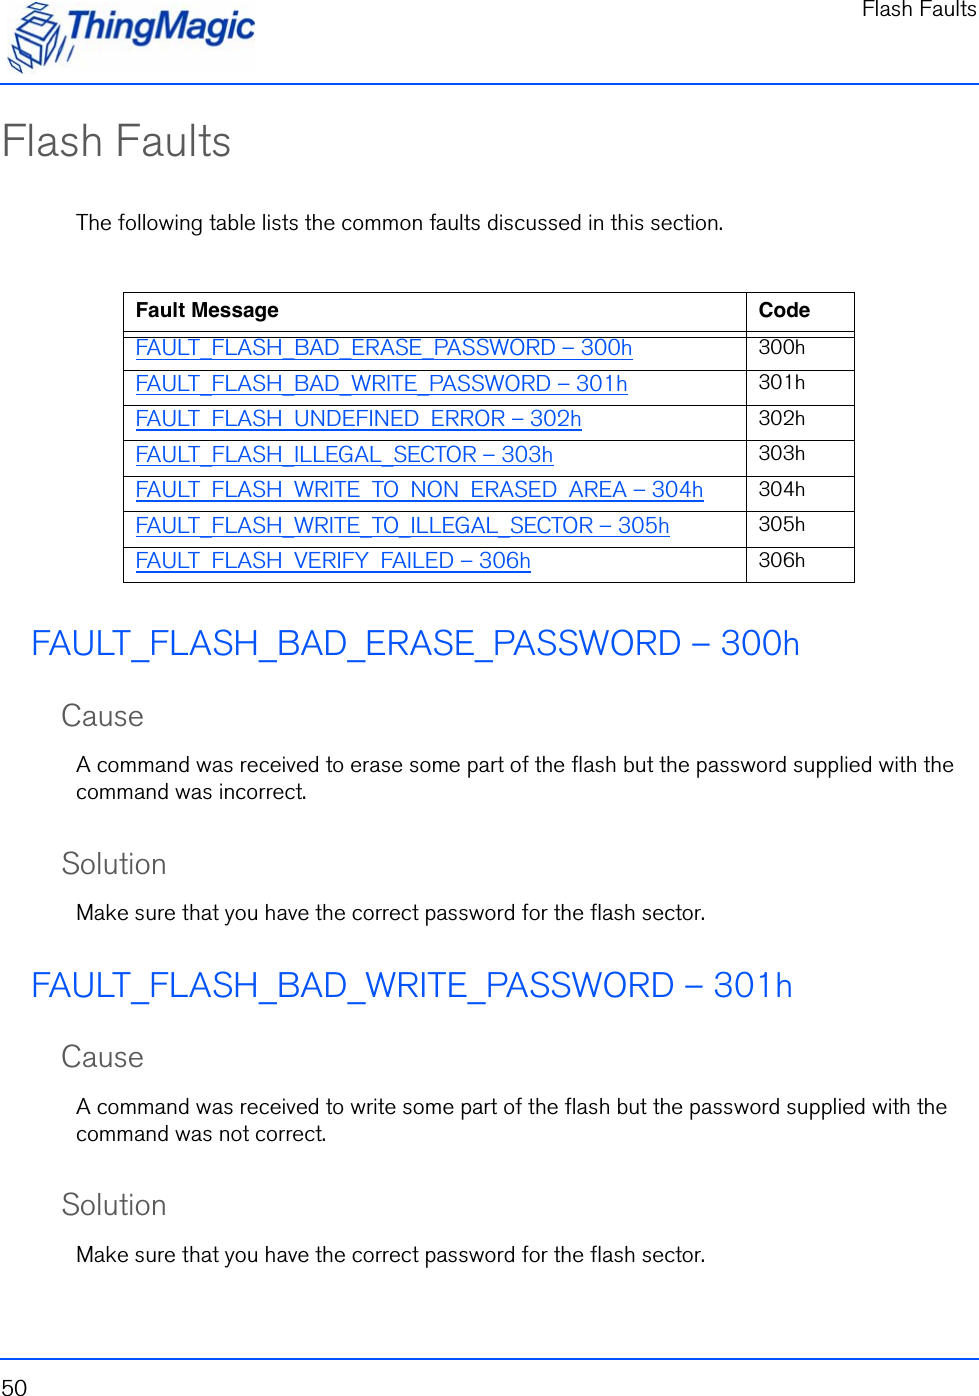 Flash Faults50Flash FaultsThe following table lists the common faults discussed in this section.FAULT_FLASH_BAD_ERASE_PASSWORD – 300hCauseA command was received to erase some part of the flash but the password supplied with the command was incorrect.SolutionMake sure that you have the correct password for the flash sector. FAULT_FLASH_BAD_WRITE_PASSWORD – 301hCauseA command was received to write some part of the flash but the password supplied with the command was not correct.SolutionMake sure that you have the correct password for the flash sector.  Fault Message CodeFAULT_FLASH_BAD_ERASE_PASSWORD – 300h 300hFAULT_FLASH_BAD_WRITE_PASSWORD – 301h 301hFAULT_FLASH_UNDEFINED_ERROR – 302h 302hFAULT_FLASH_ILLEGAL_SECTOR – 303h 303hFAULT_FLASH_WRITE_TO_NON_ERASED_AREA – 304h 304hFAULT_FLASH_WRITE_TO_ILLEGAL_SECTOR – 305h 305hFAULT_FLASH_VERIFY_FAILED – 306h 306h